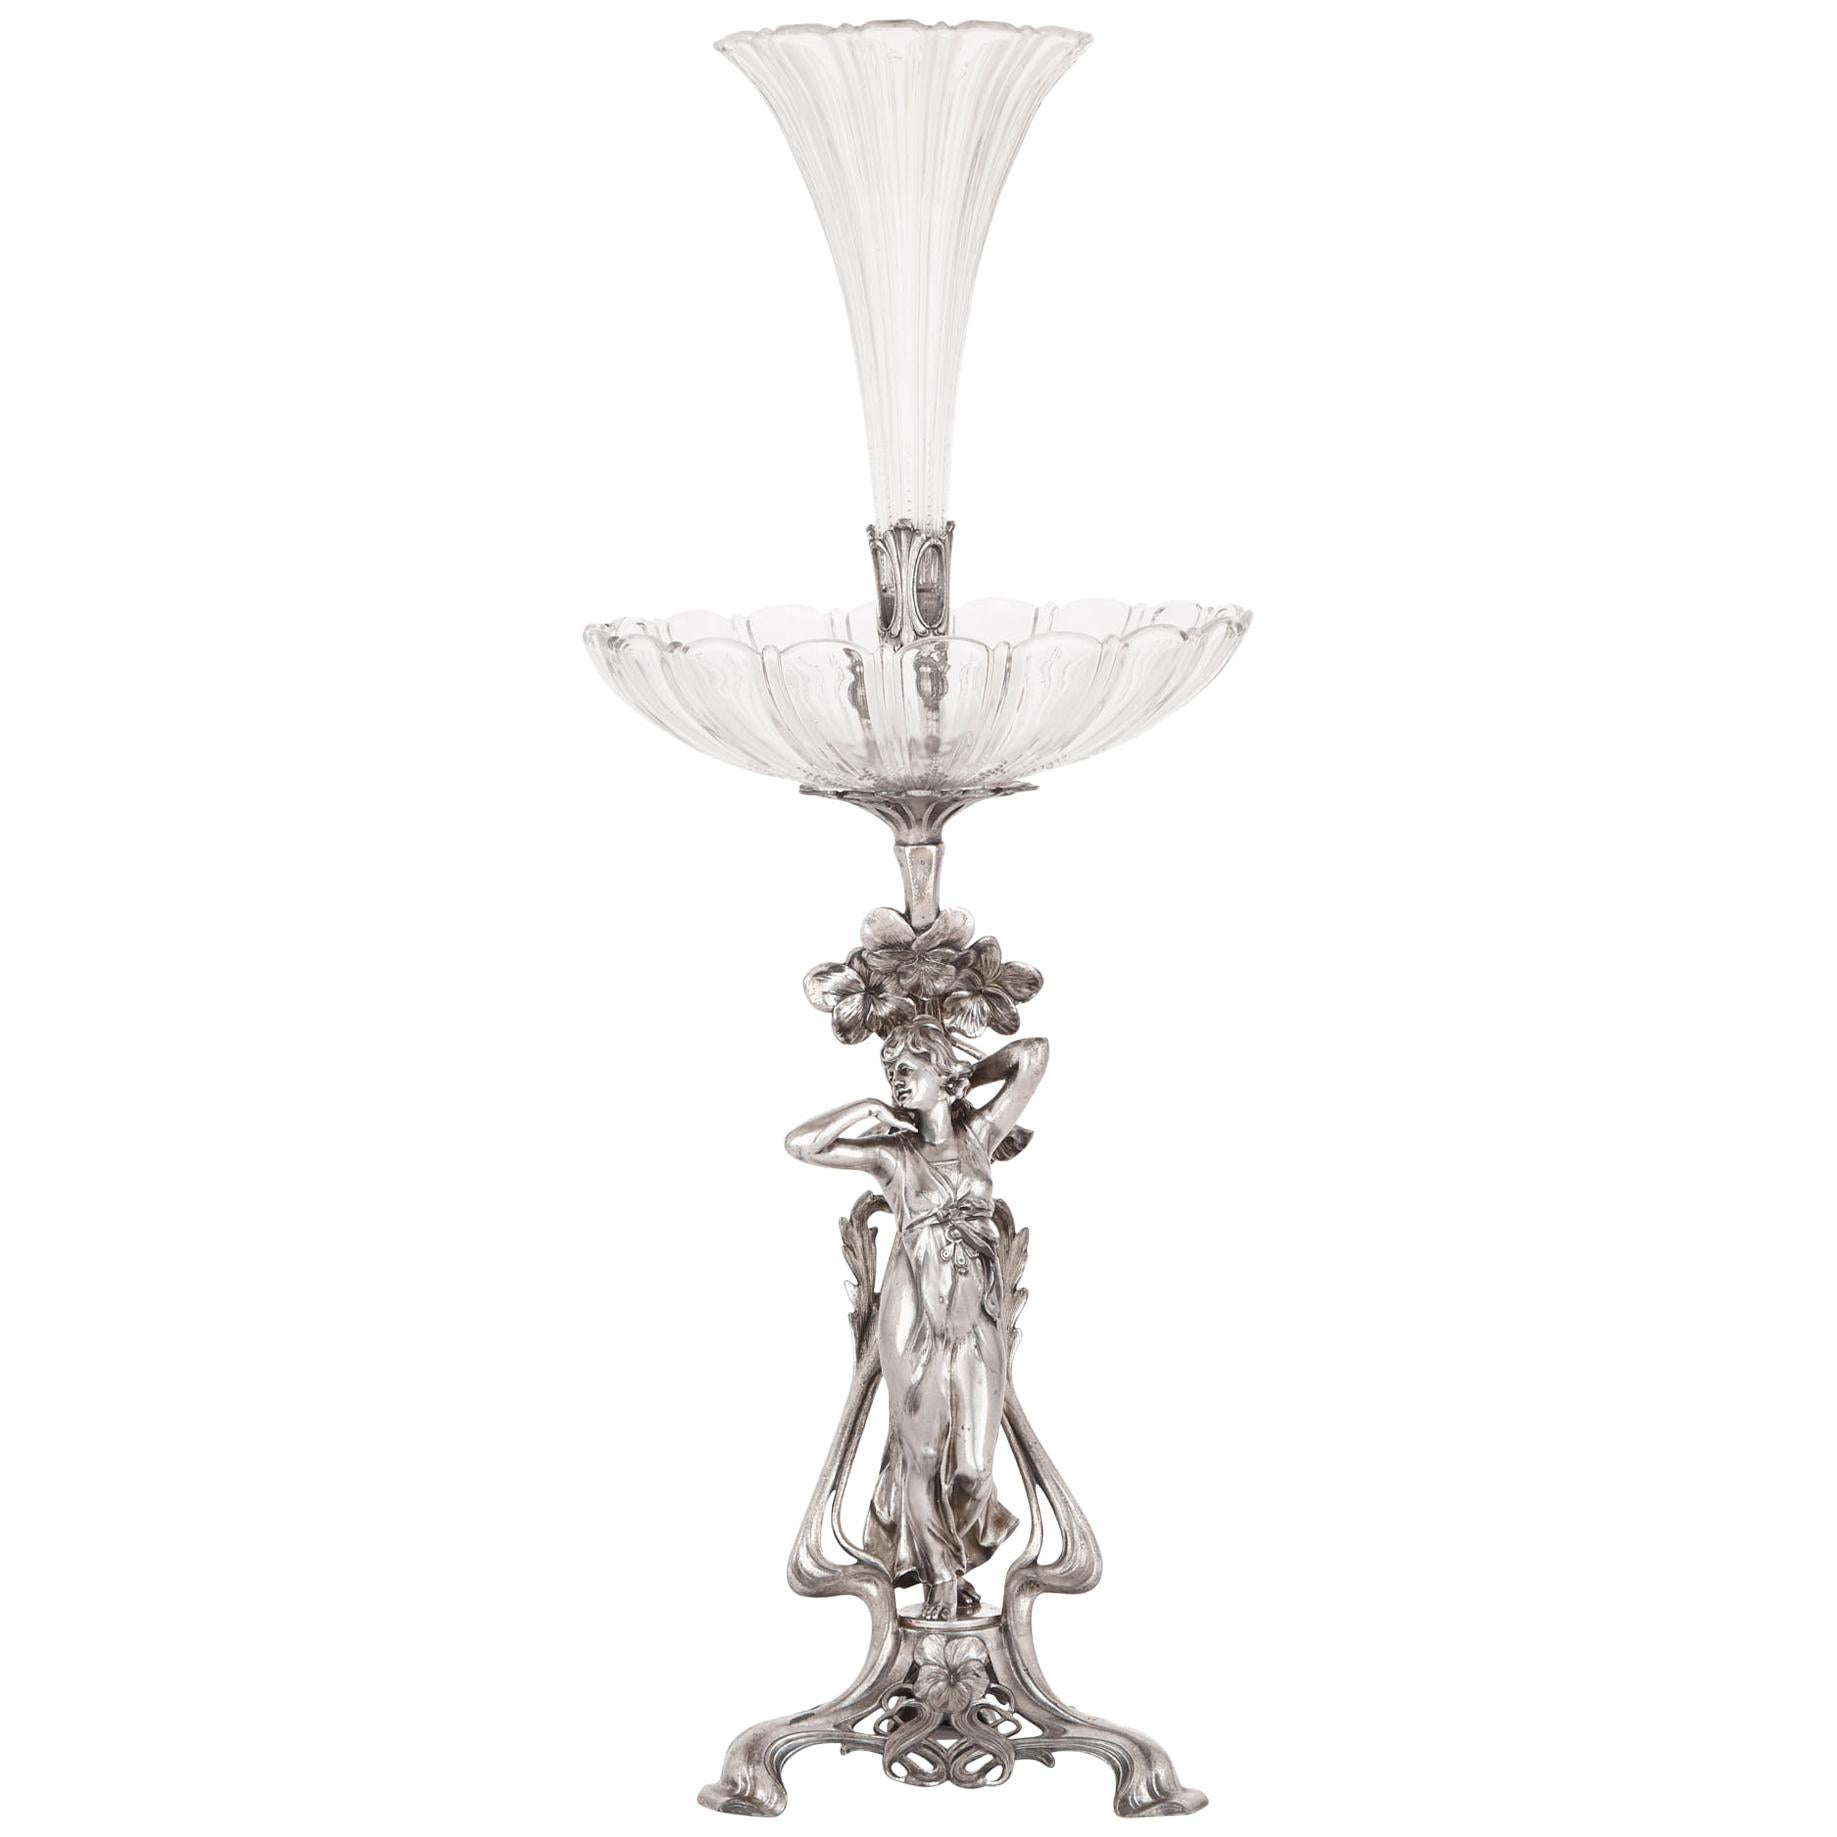 Art Nouveau glass and silvered metal centrepiece by WMF